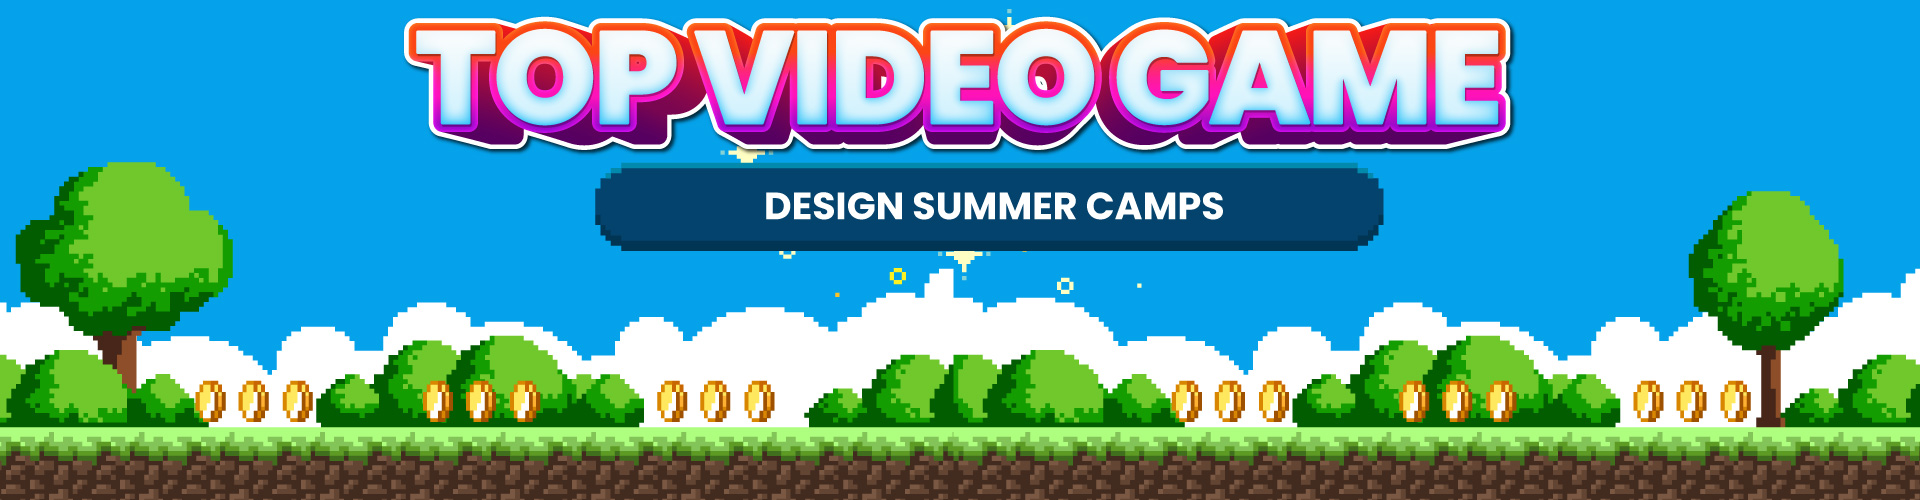 Top Video Game Design Summer Camps